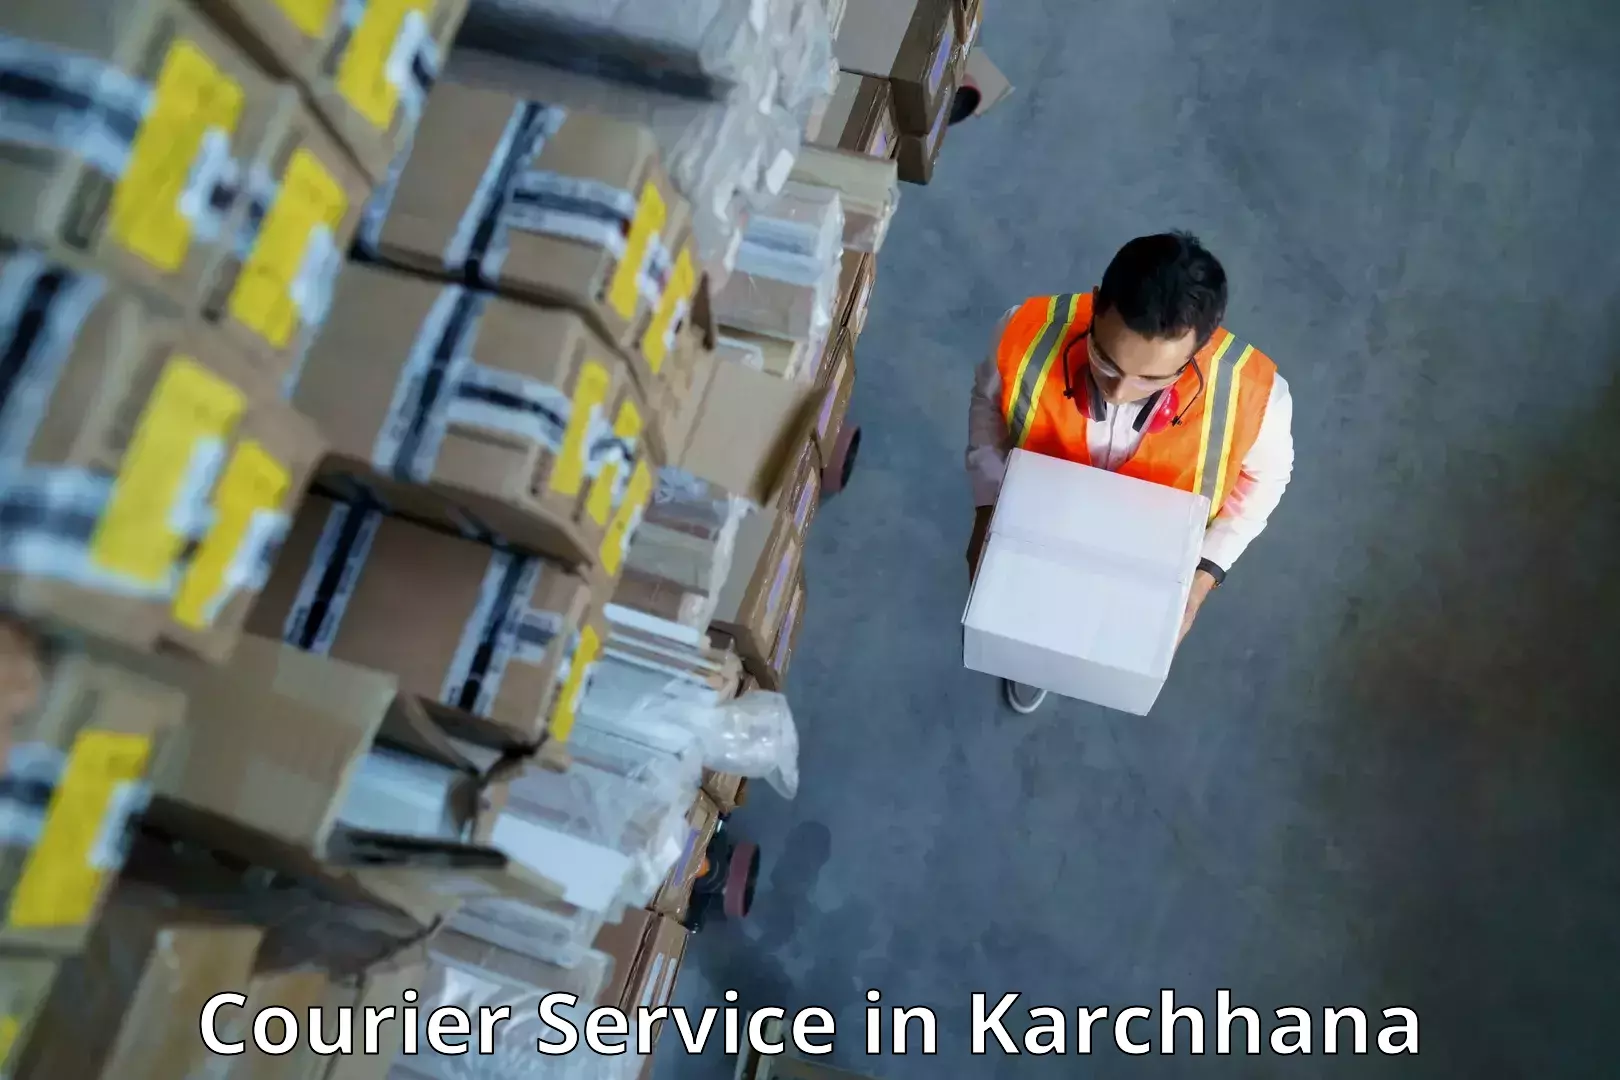 Sustainable courier practices in Karchhana